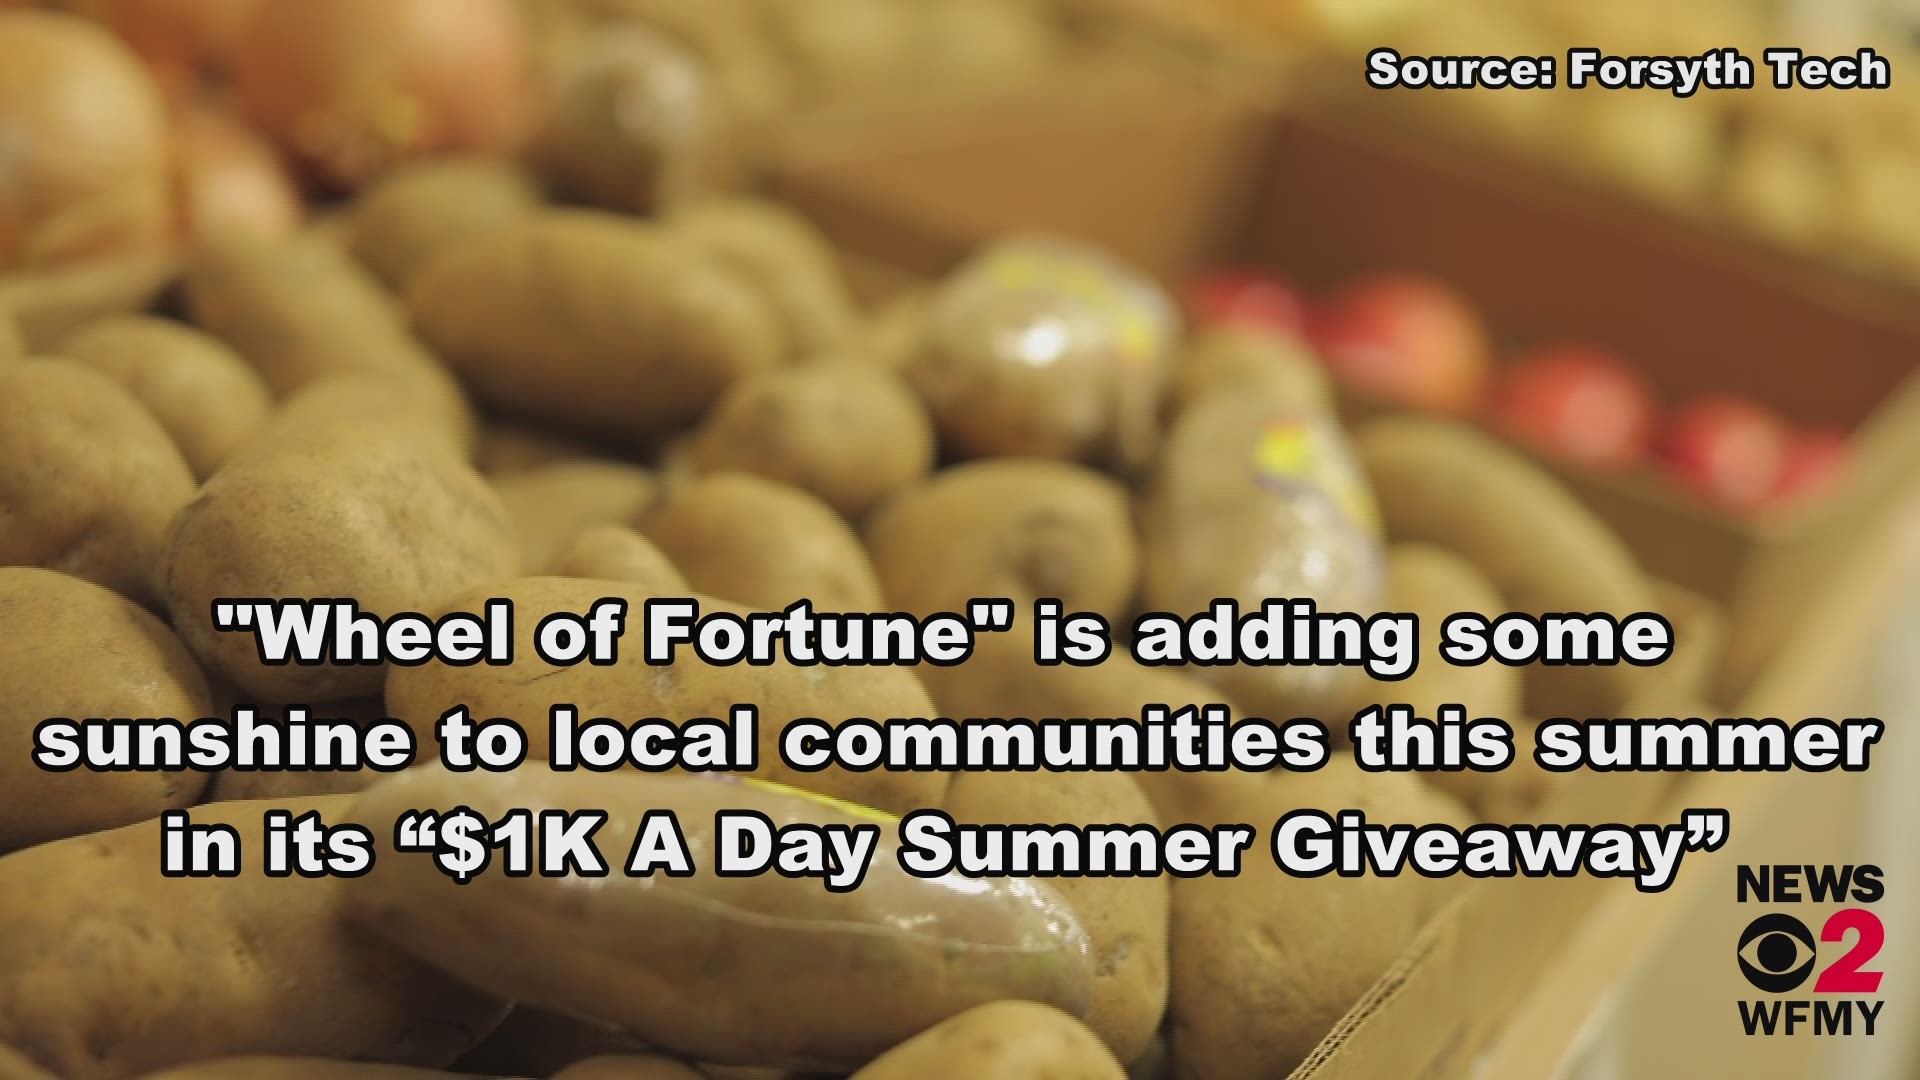 Louise Davis is thrilled to have won Wheel of Fortune's "1K a Day Summer Giveaway" and help the Clemmons Food Pantry